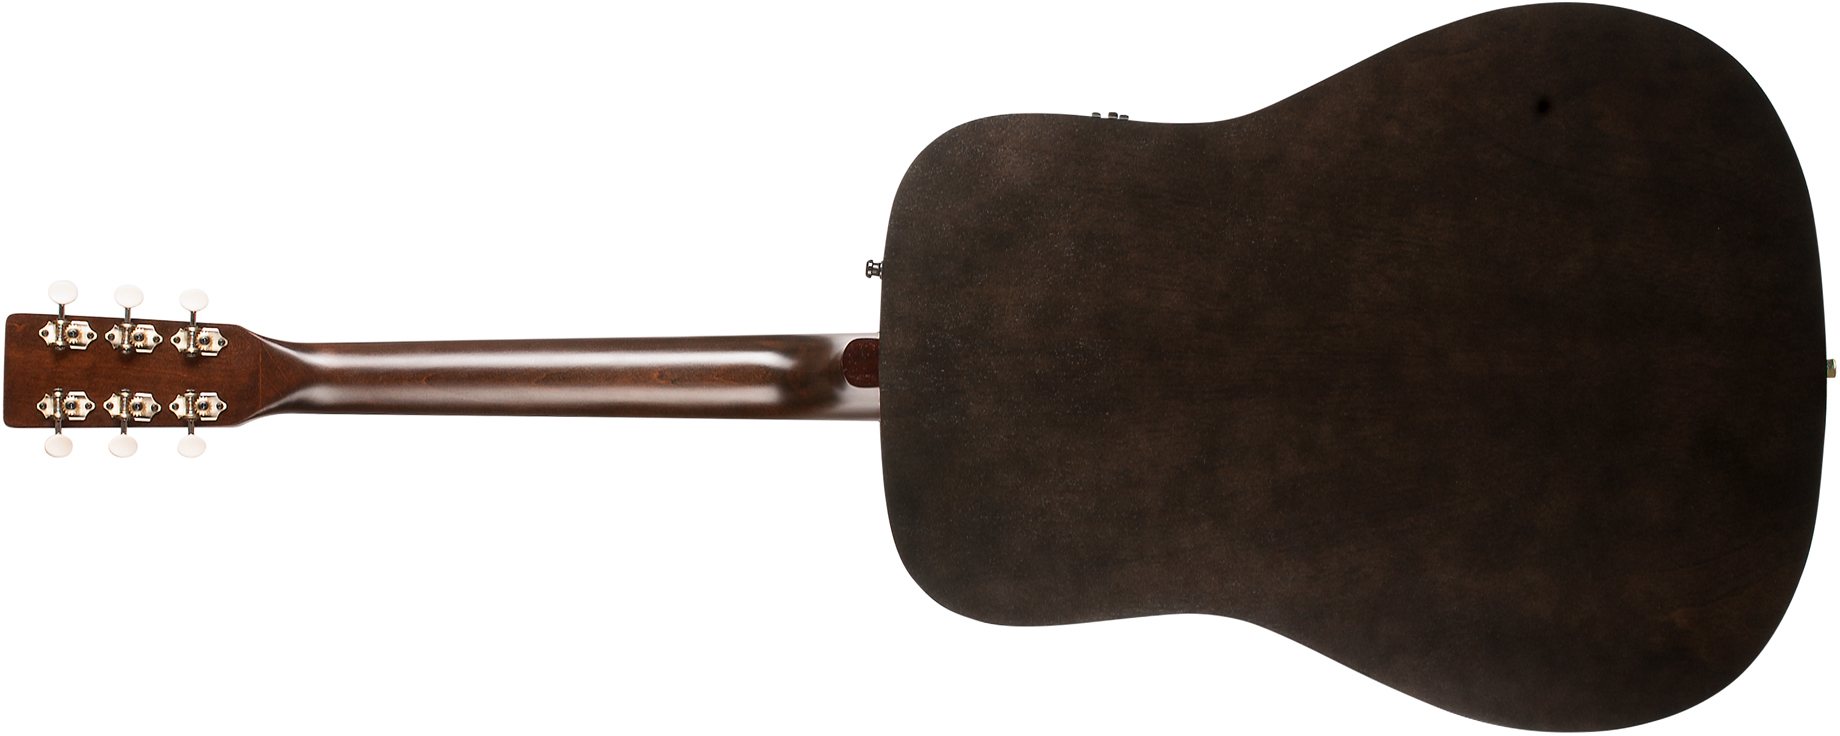 Art Et Lutherie Americana Presys Ii Dreadnought Cedre Merisier Rw - Faded Black - Guitare Electro Acoustique - Variation 1